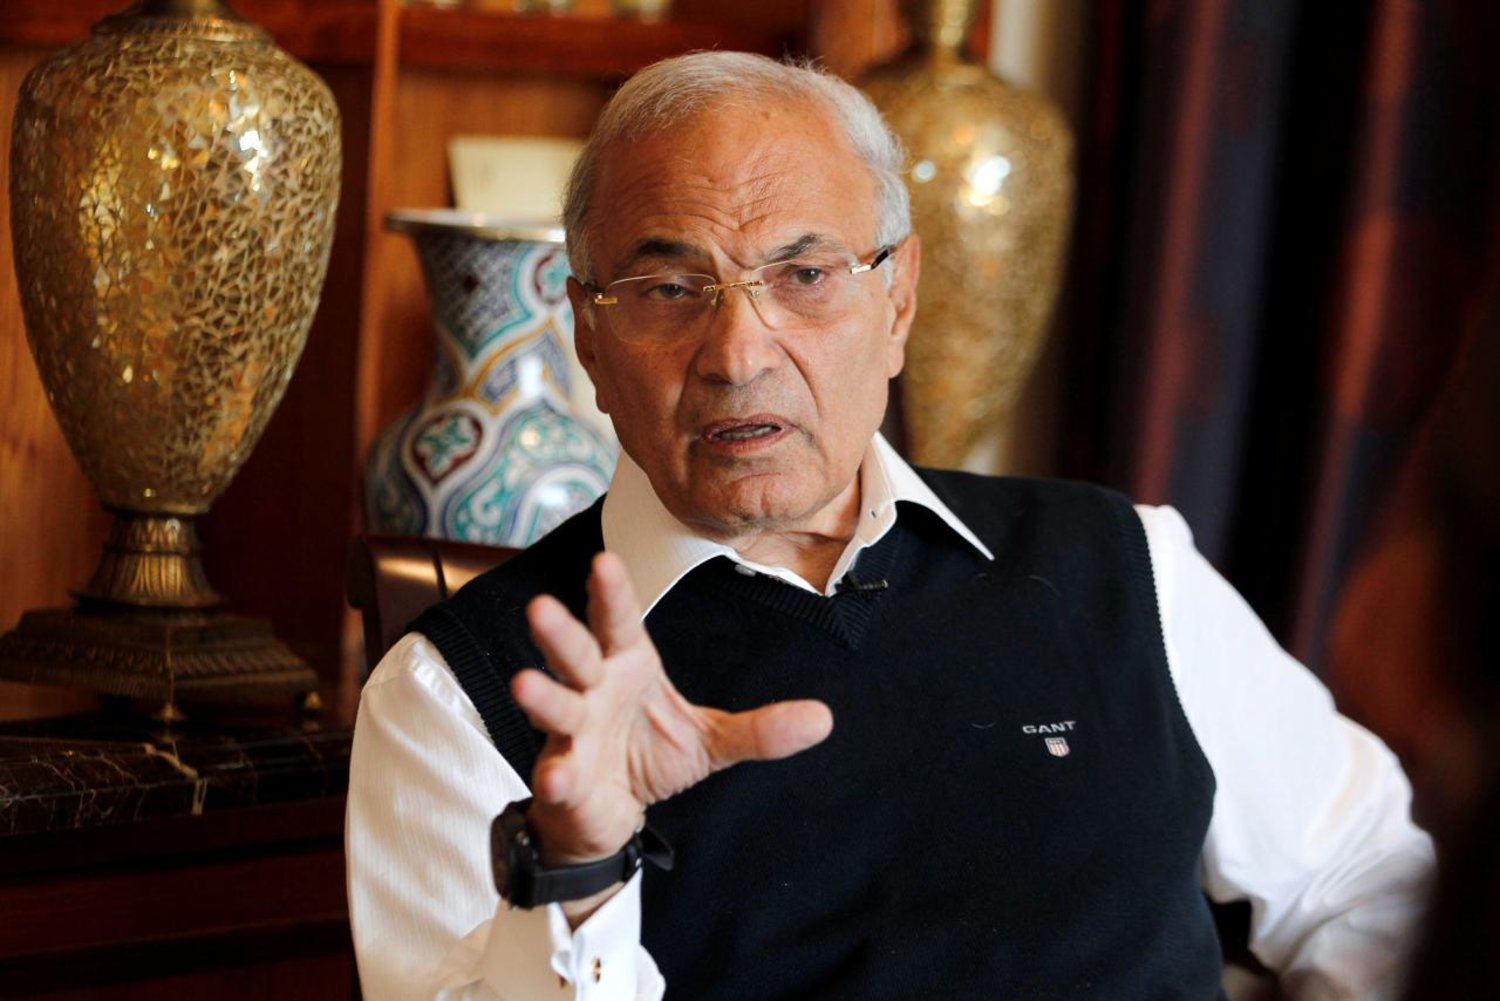 Egypt's former Prime Minister Ahmed Shafik speaks during an interview at his residence in Abu Dhabi February 6, 2013. (Reuters)